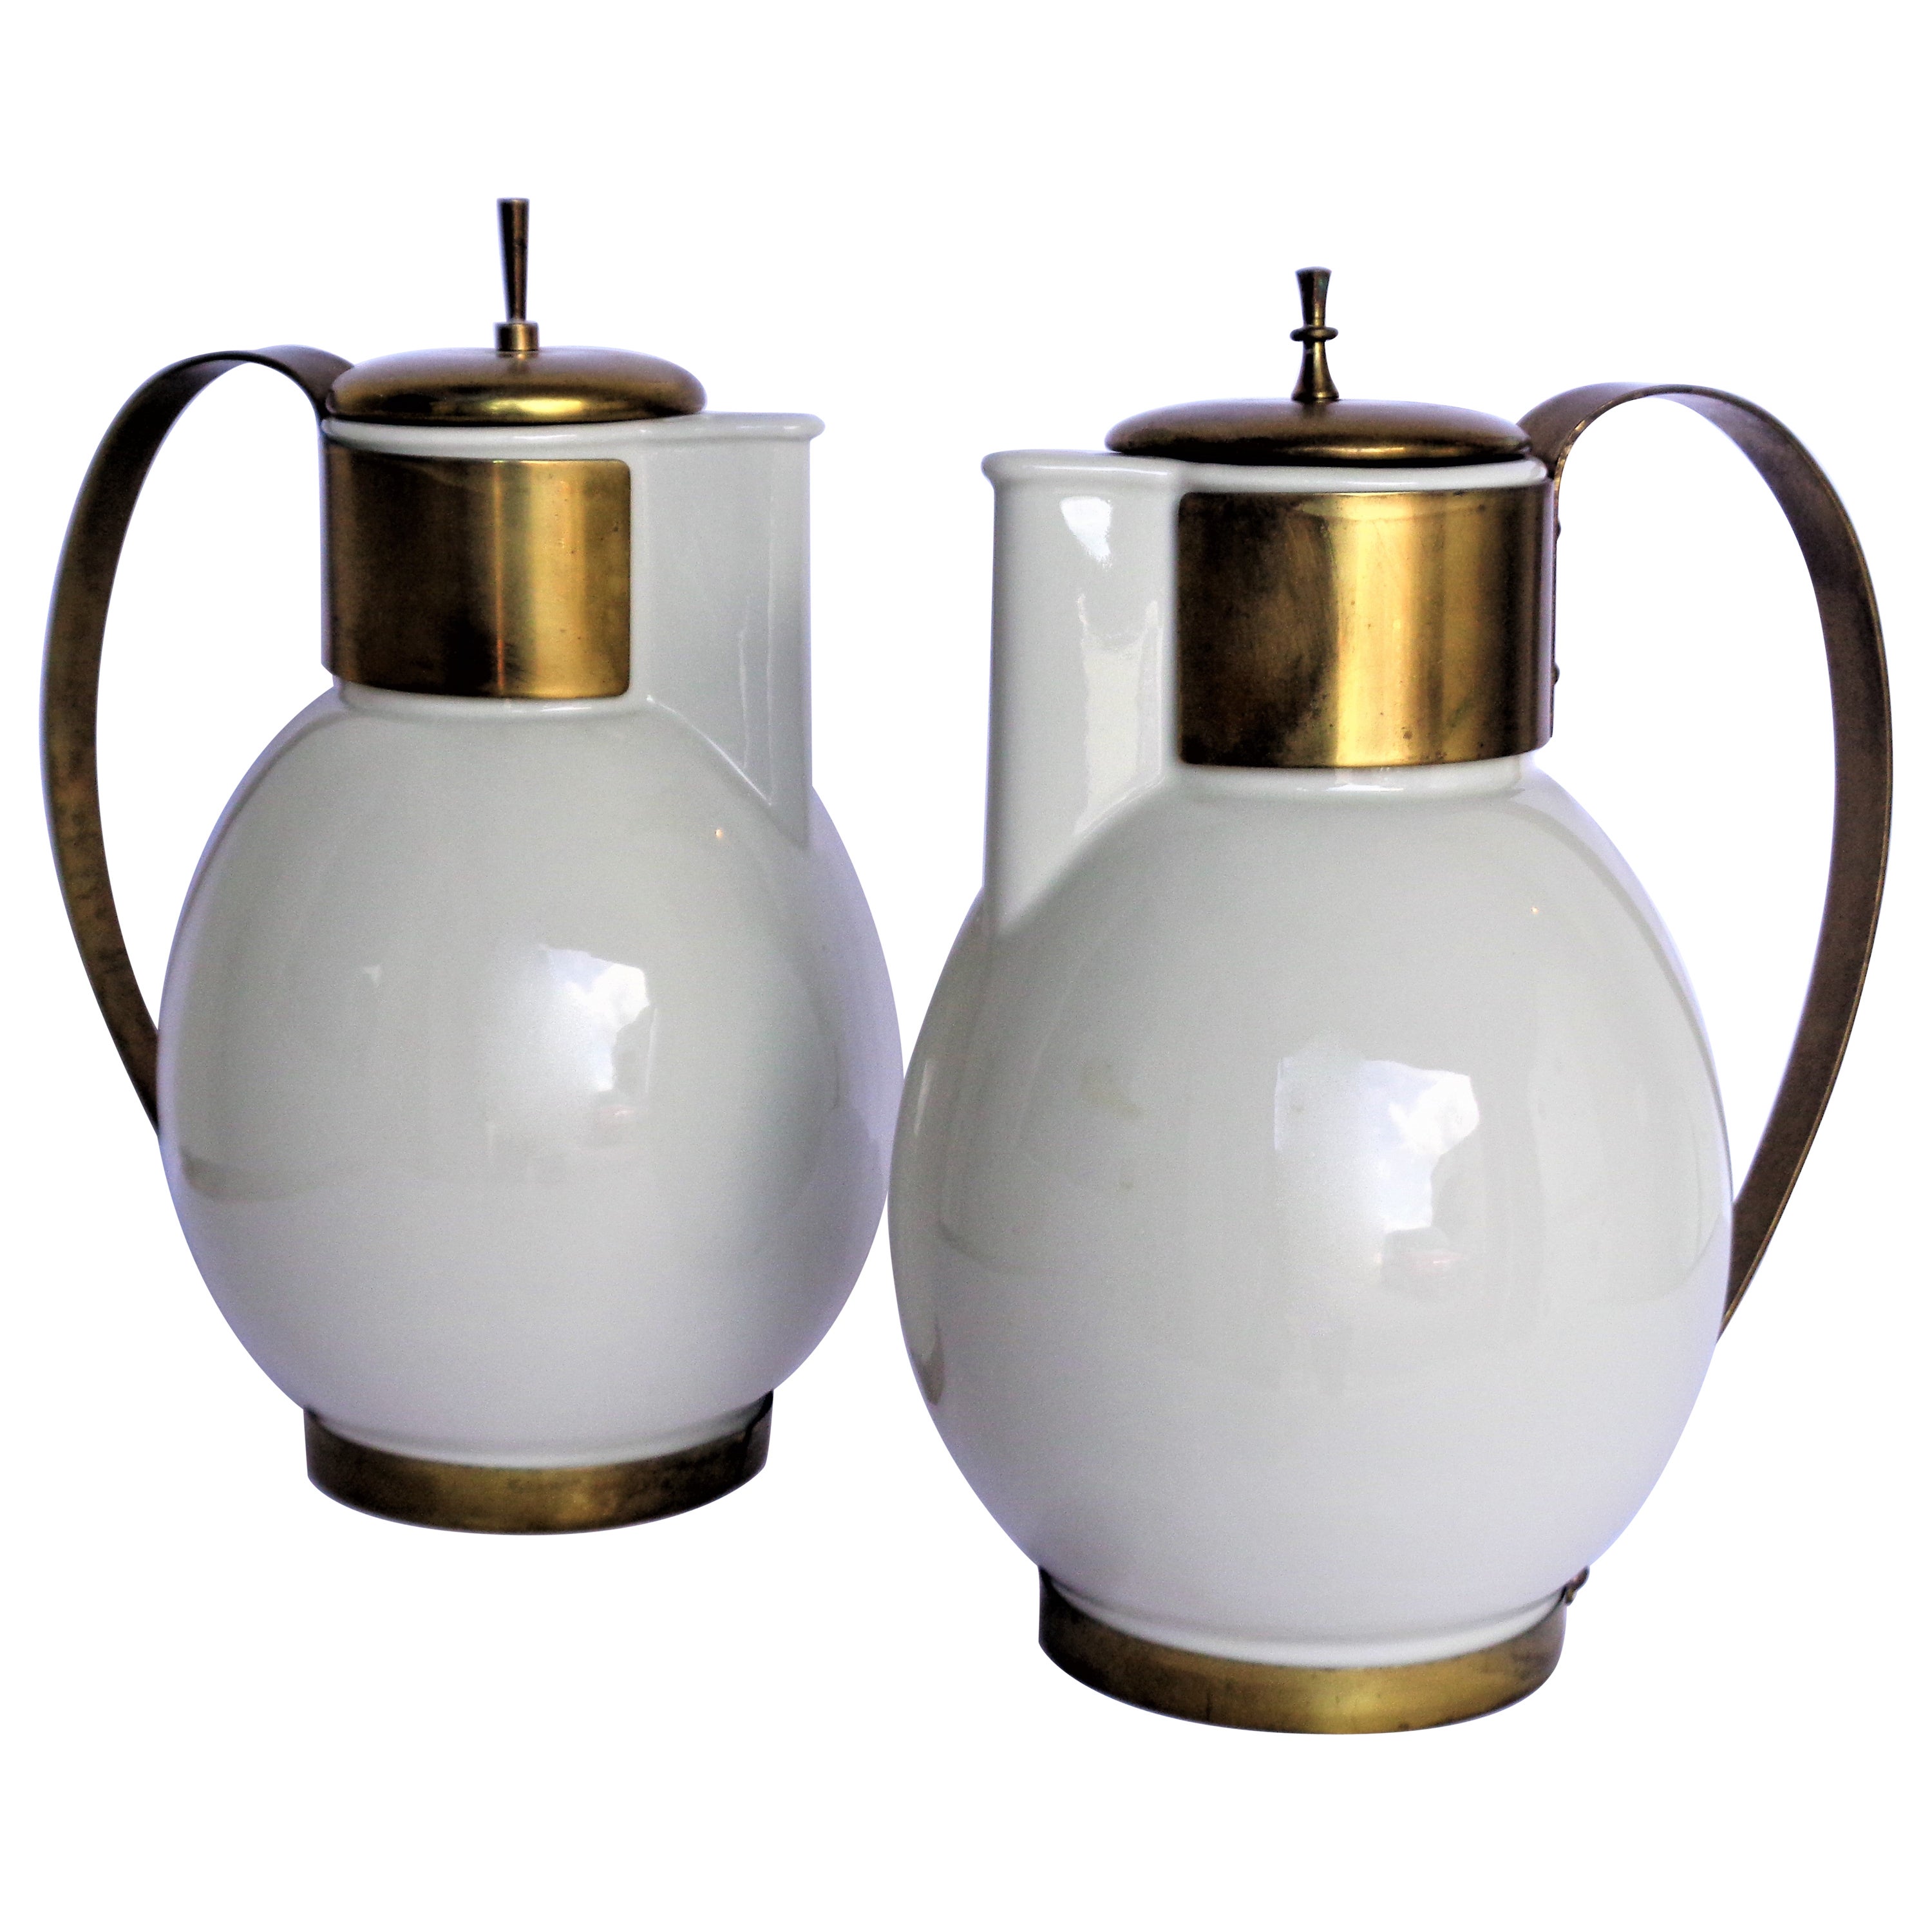 Porcelain and Brass Coffee Servers by Ernest Sohn, Circa 1950